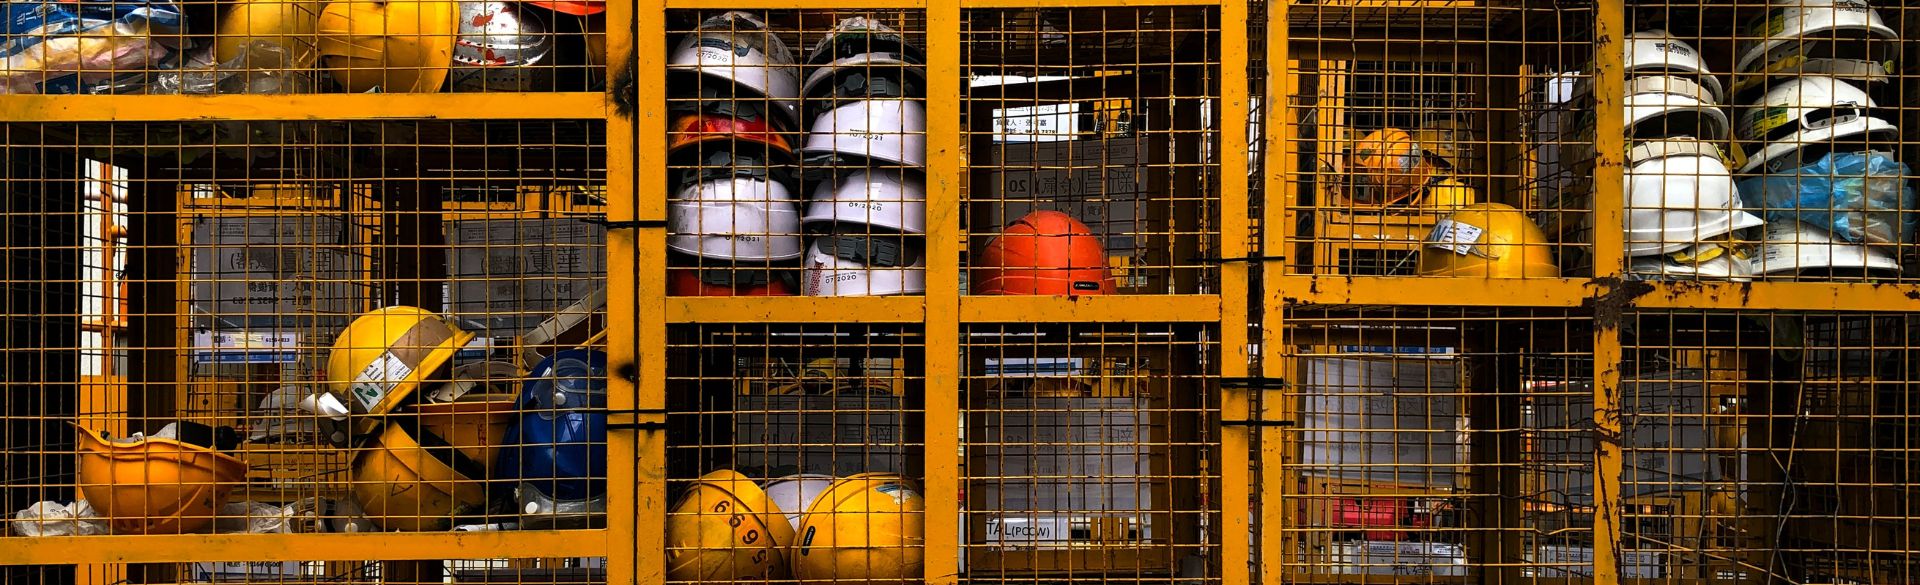 Hard hats in netted cabinet